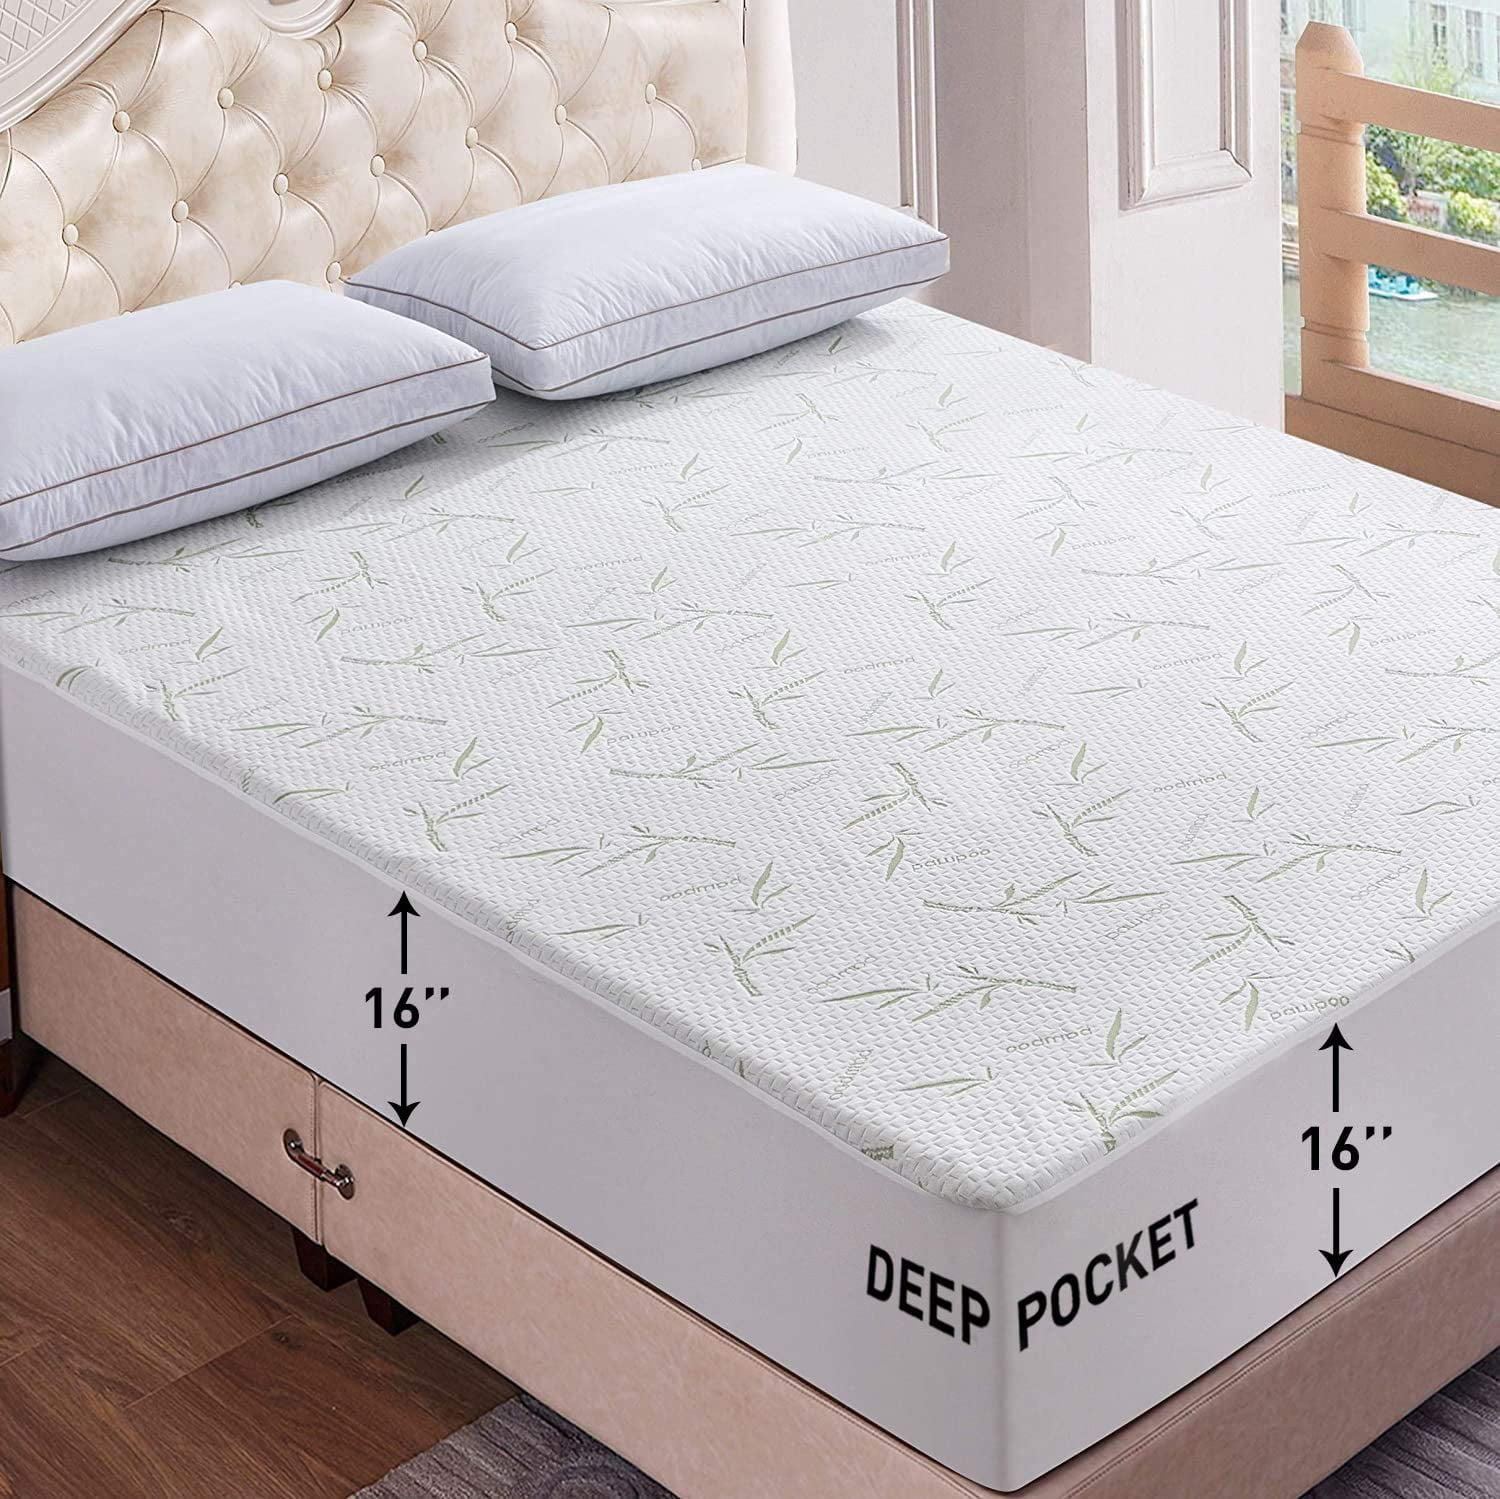 NEW BAMBOO BLEND SOFT WATERPROOF BREATHABLE HYPOALLERGENIC MATRESS PROTECTOR 